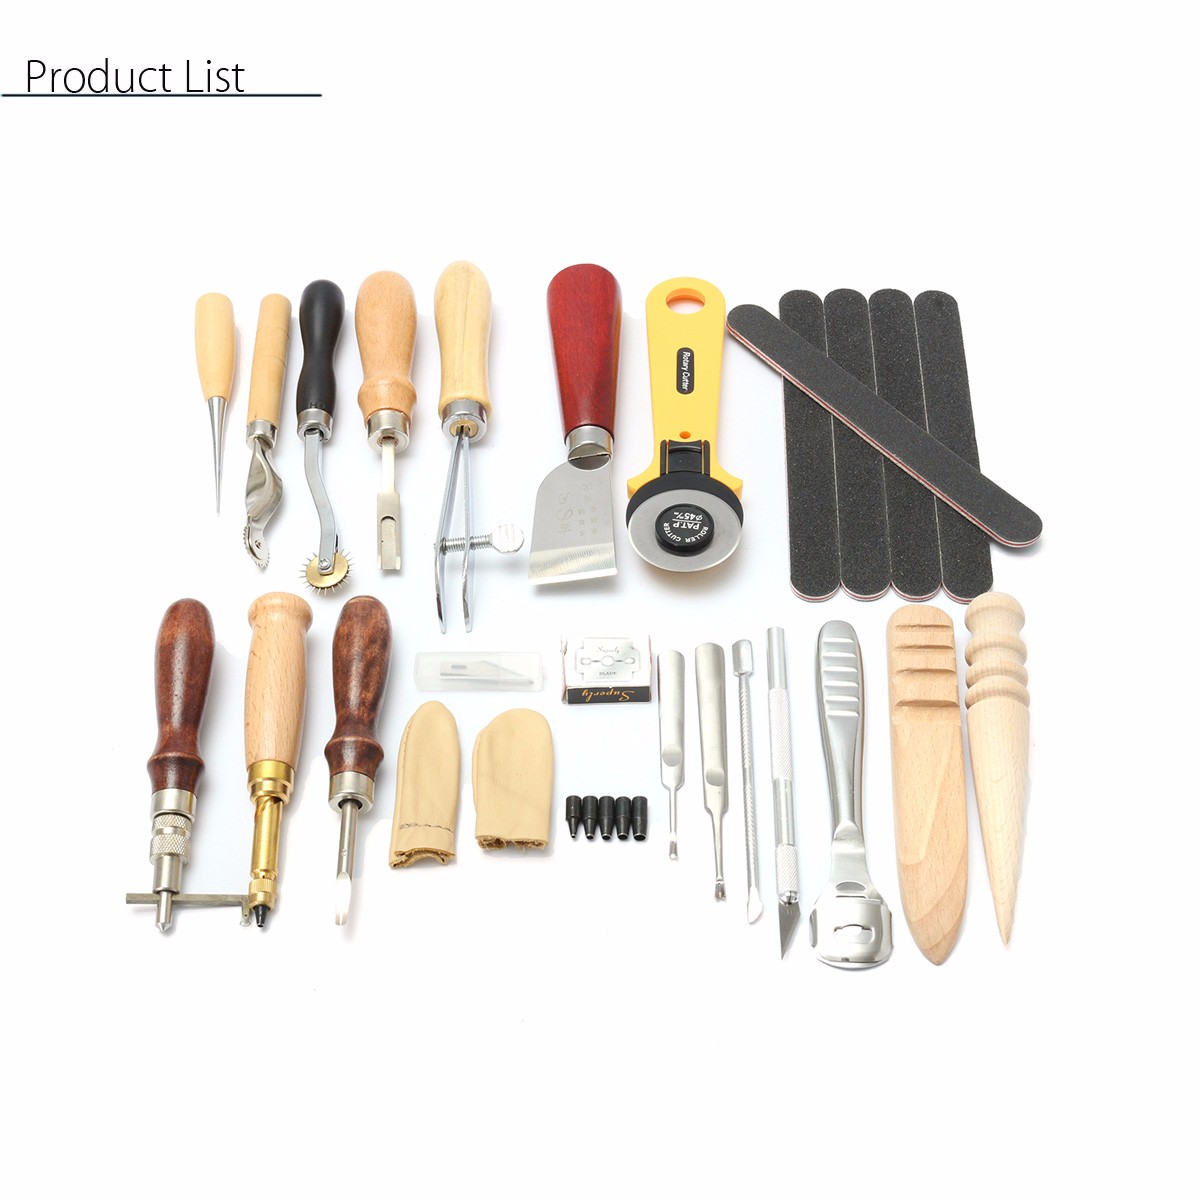 24pcs-Leather-Craft-Punch-Tools-Kit-Hand-Sewing-Stitching-Carving-Work-Saddle-Groover-1104764